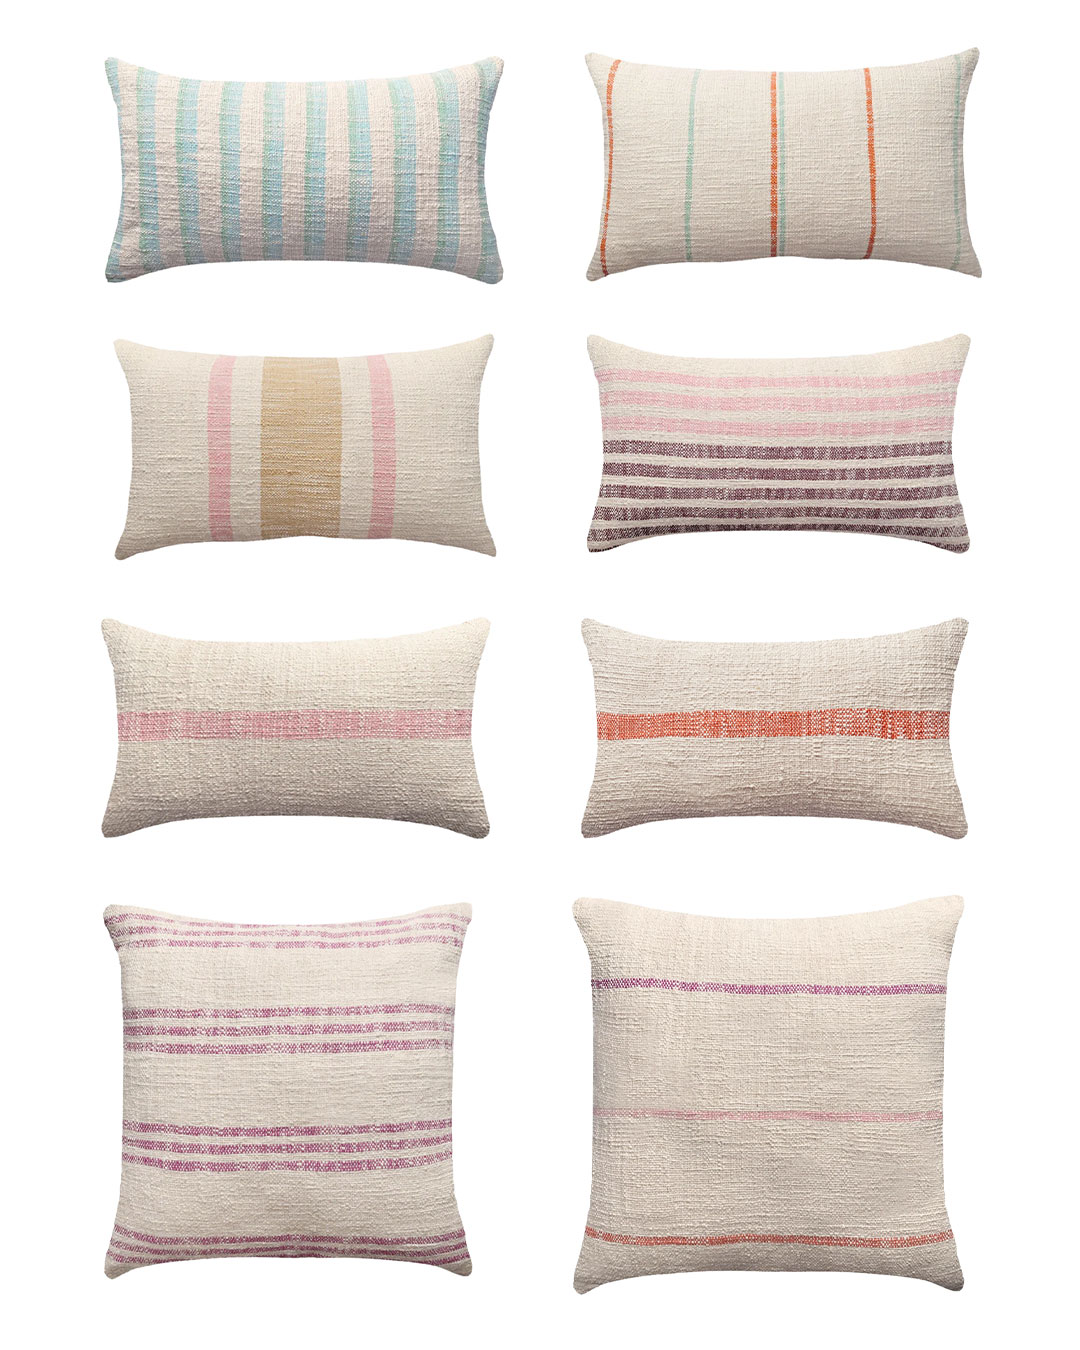 sustainable pillows & home decor by pillowpia - collage of pastel pillows